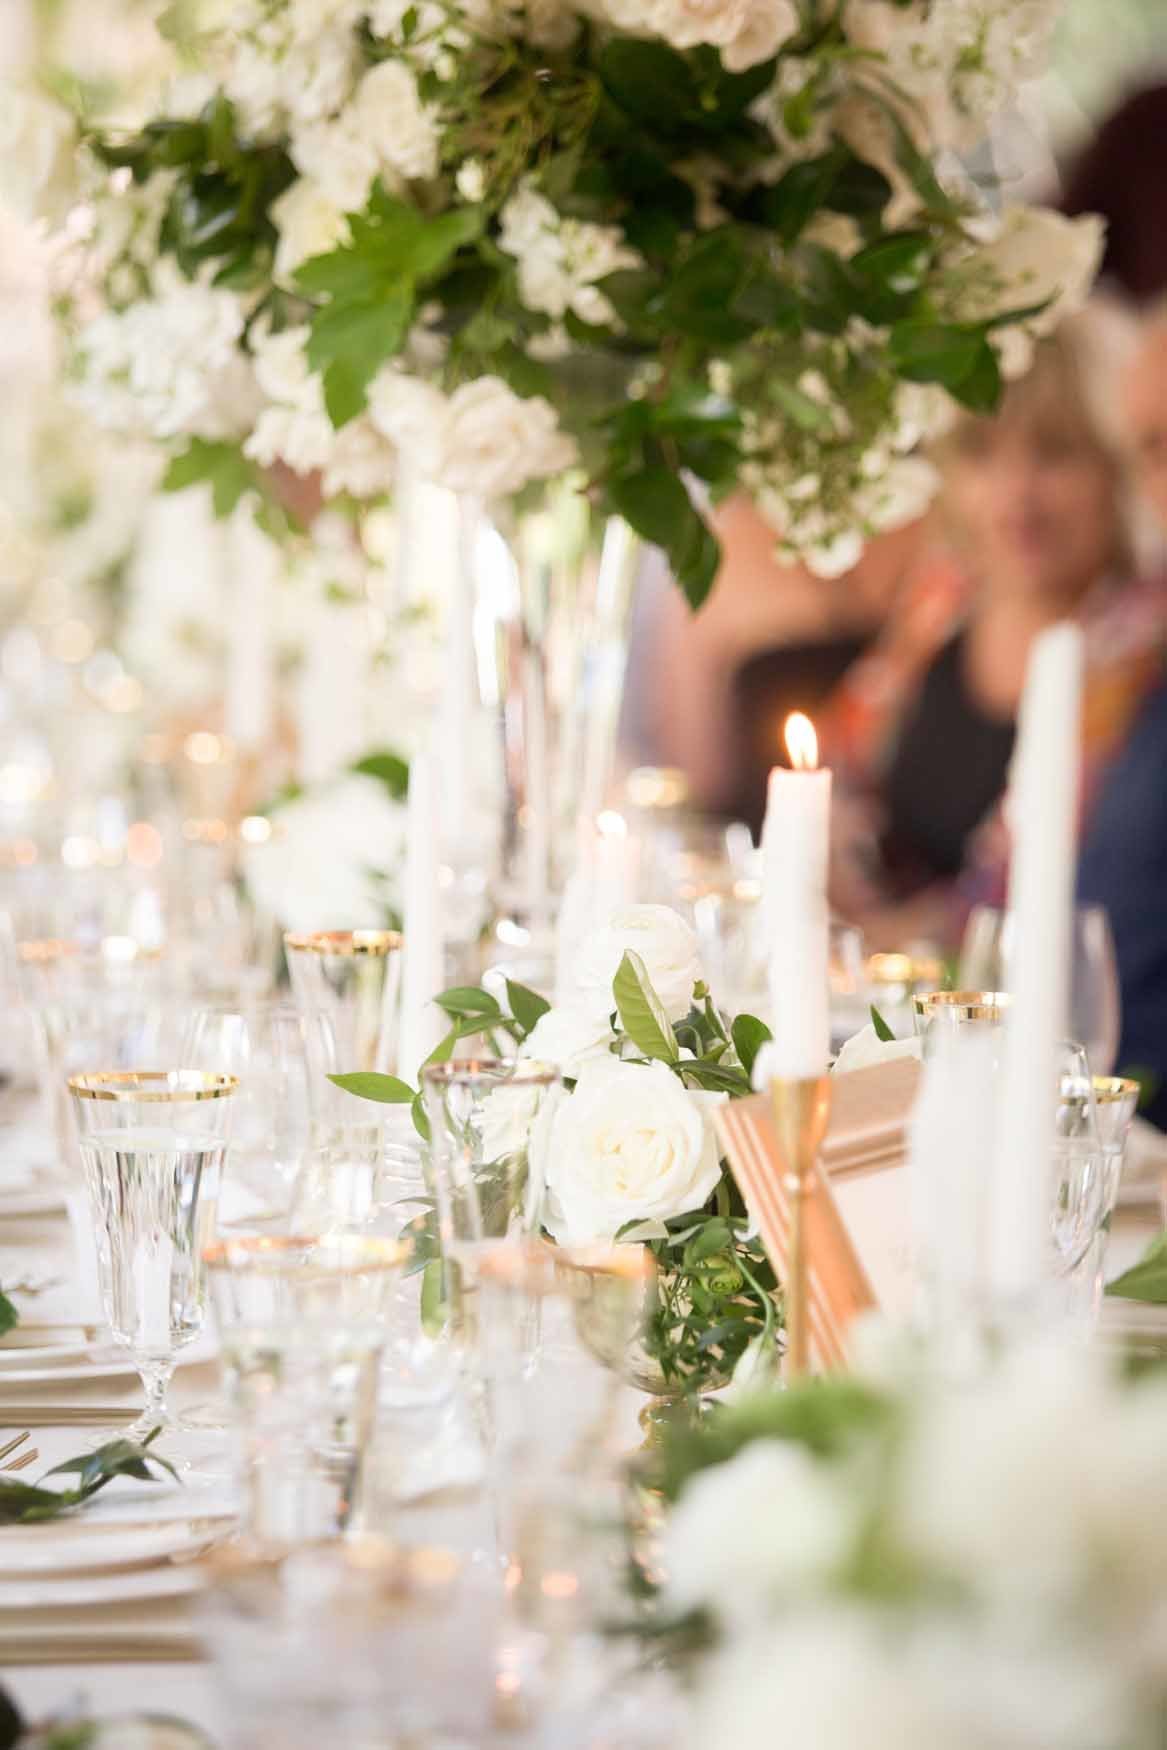 Tall garden style white and green arrangement with candles